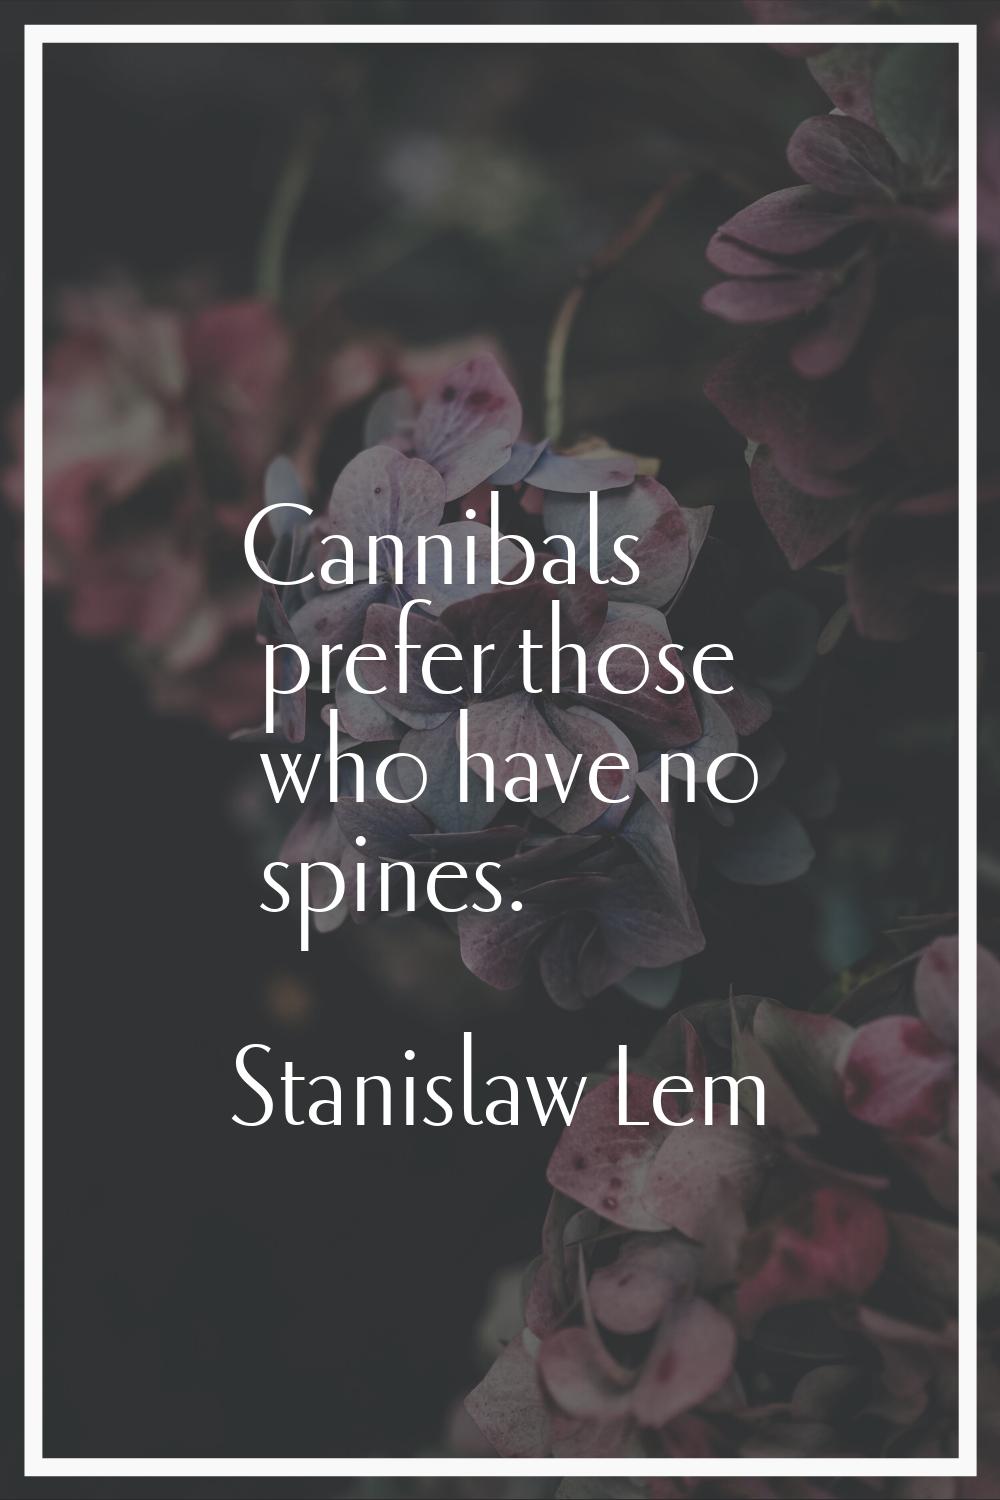 Cannibals prefer those who have no spines.